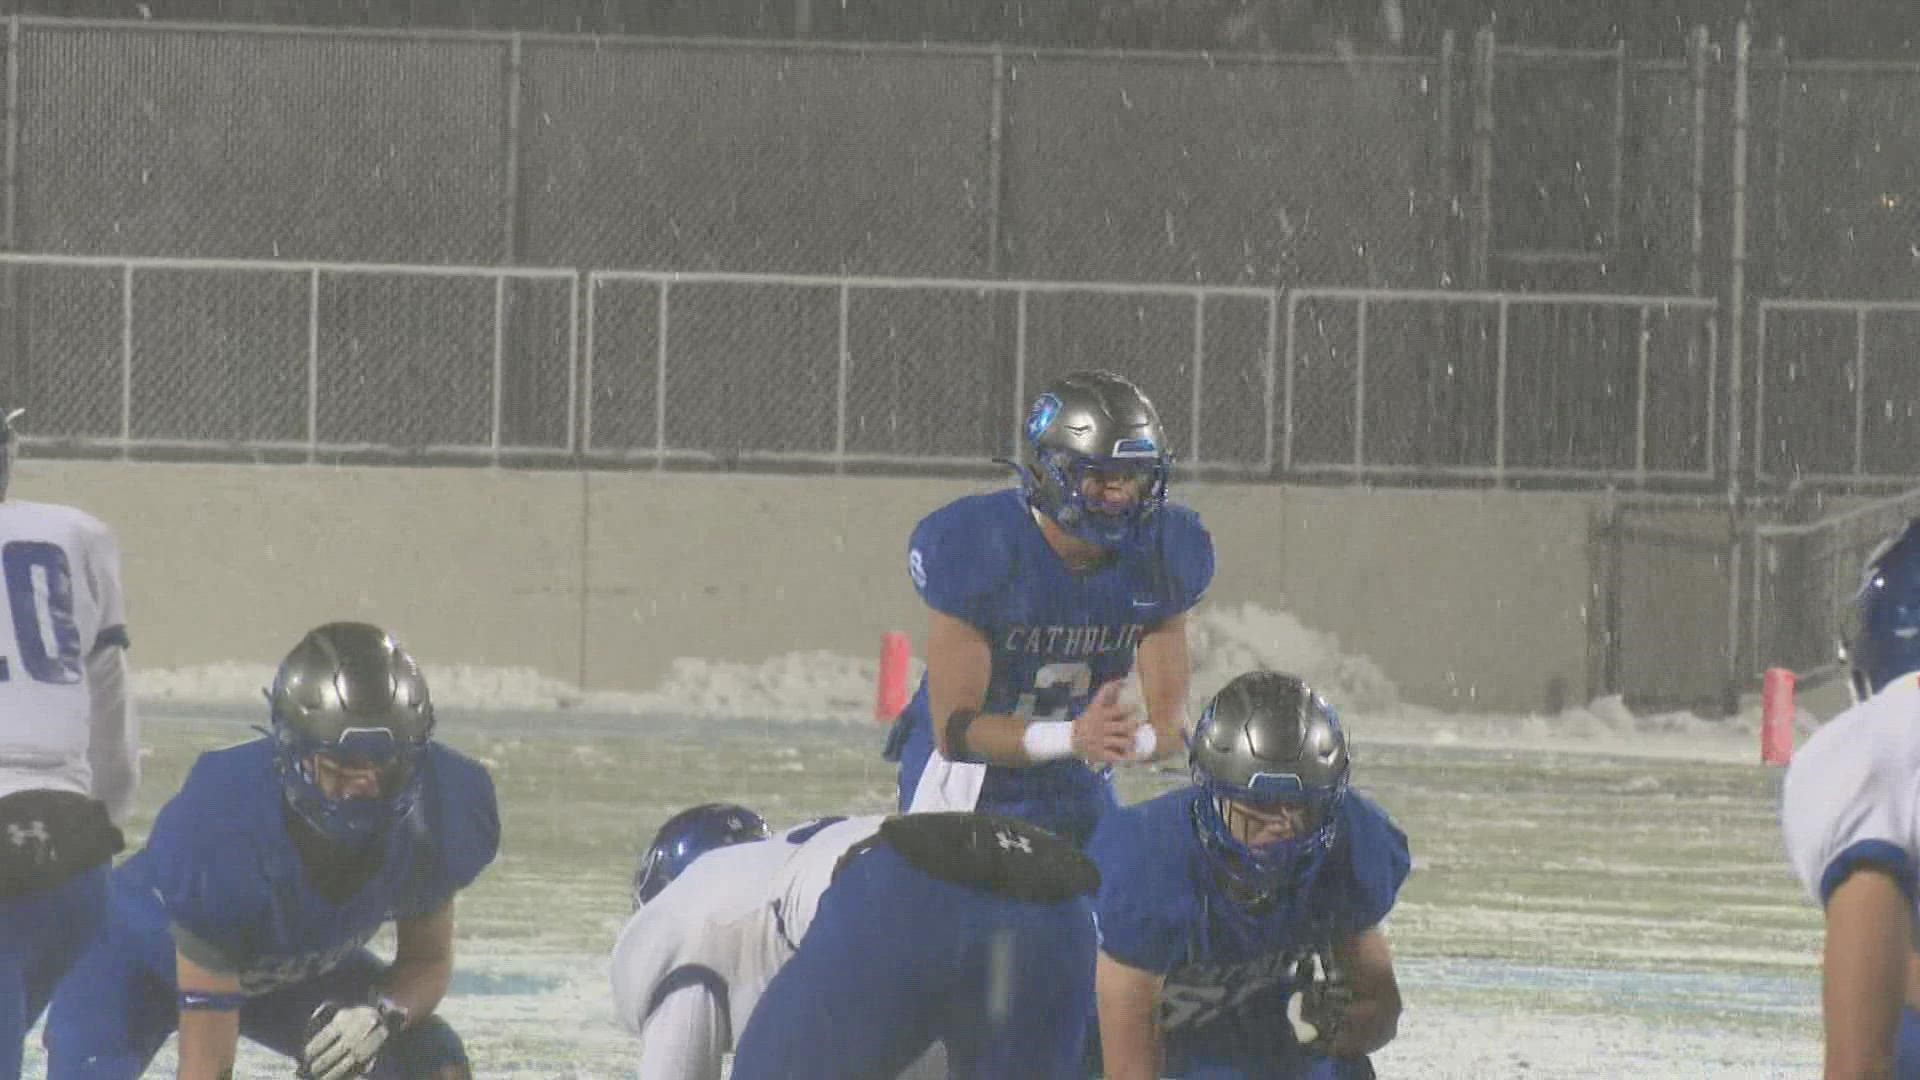 The Cougars survive the wild weather to win 25-6 and move on to the state semis.